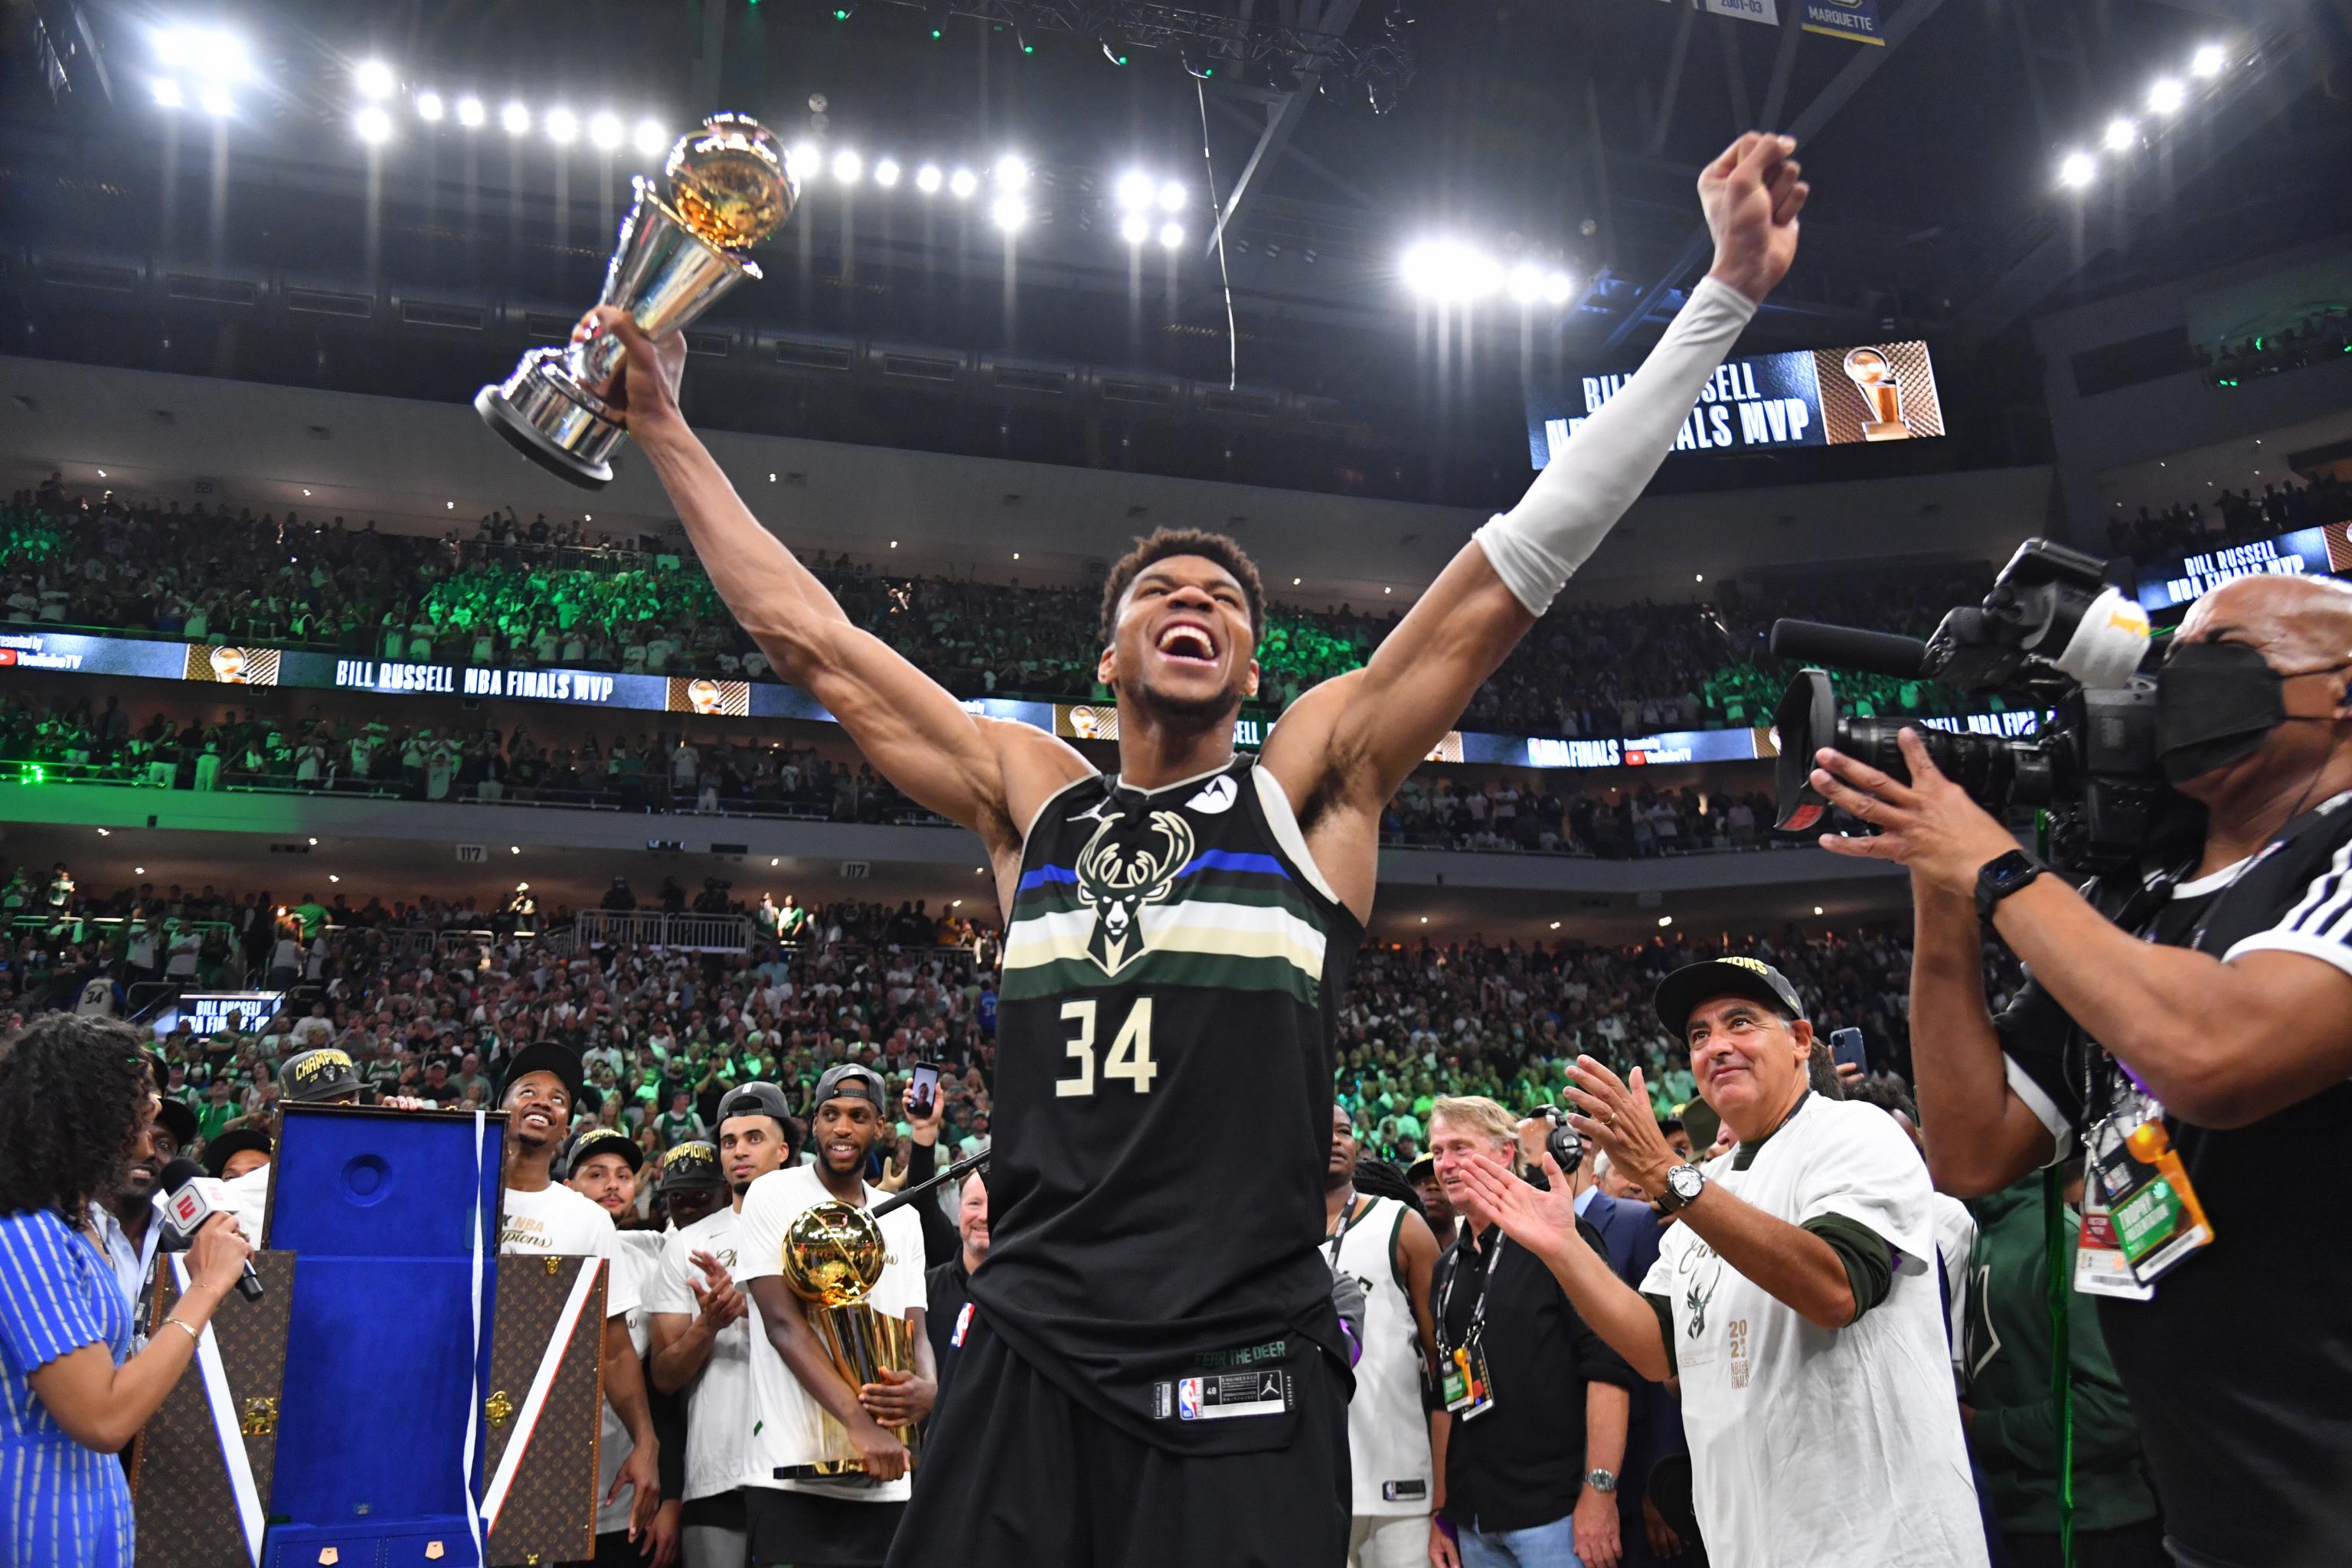 Giannis Antetokounmpo's Game 6 performance was iconic, and had the NBA  world buzzing